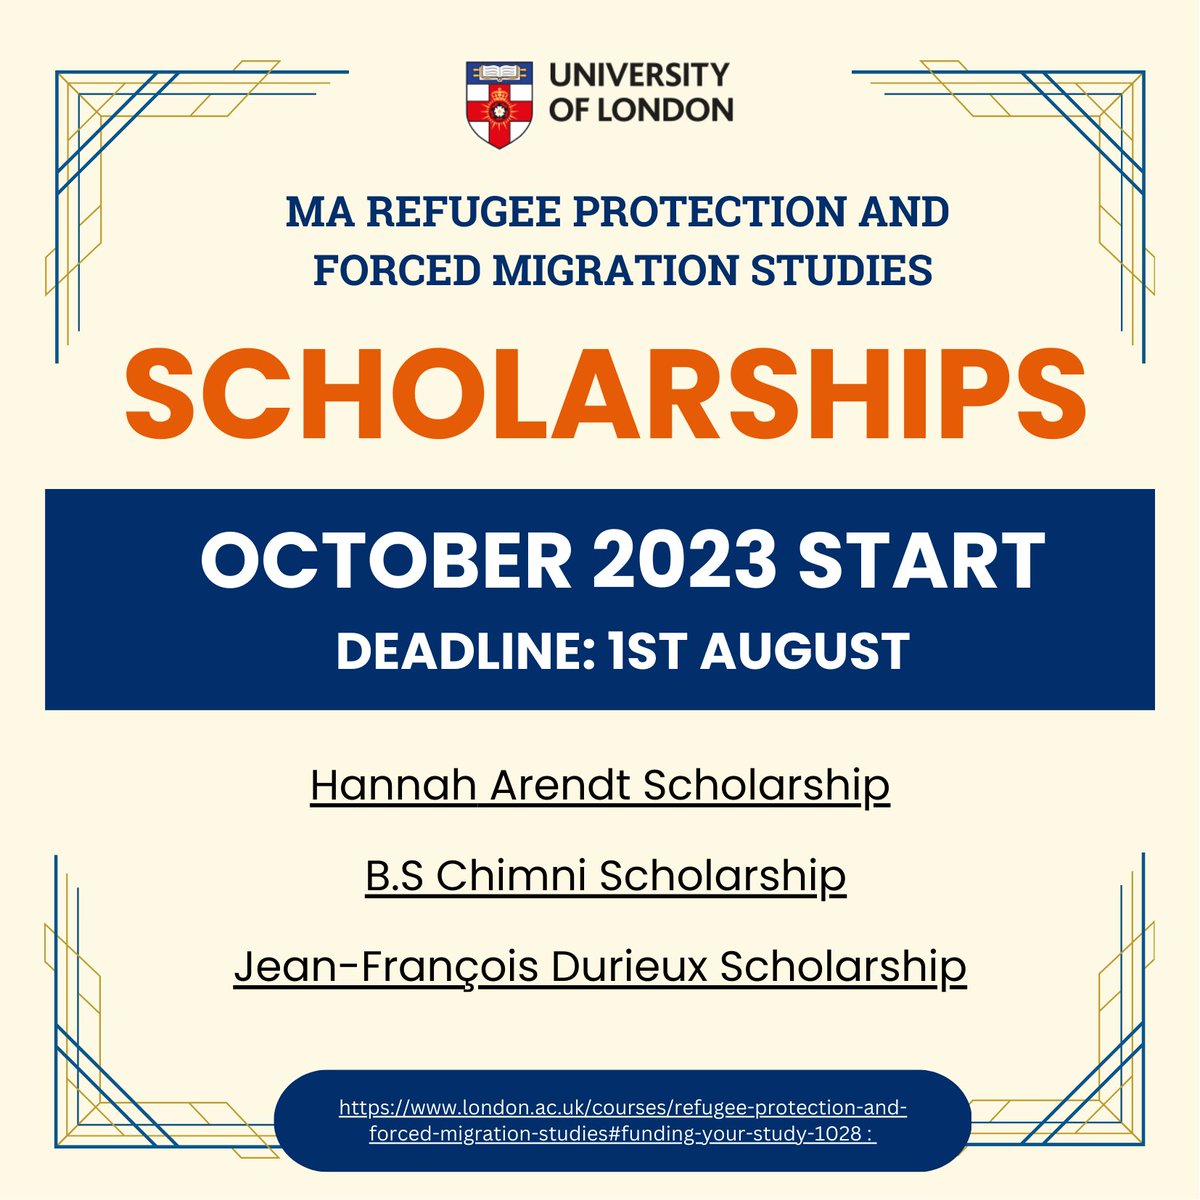 Apply by TOMORROW for 3 full scholarships for the MA in Refugee Protection and Migration Studies - October 2023 start. @sasnews @LondonU london.ac.uk/applications/f… #RefugeeStudies #RefugeeProtection #Refugees #MigrationStudies #PostgraduateStudy #DistanceLearning #Scholarships